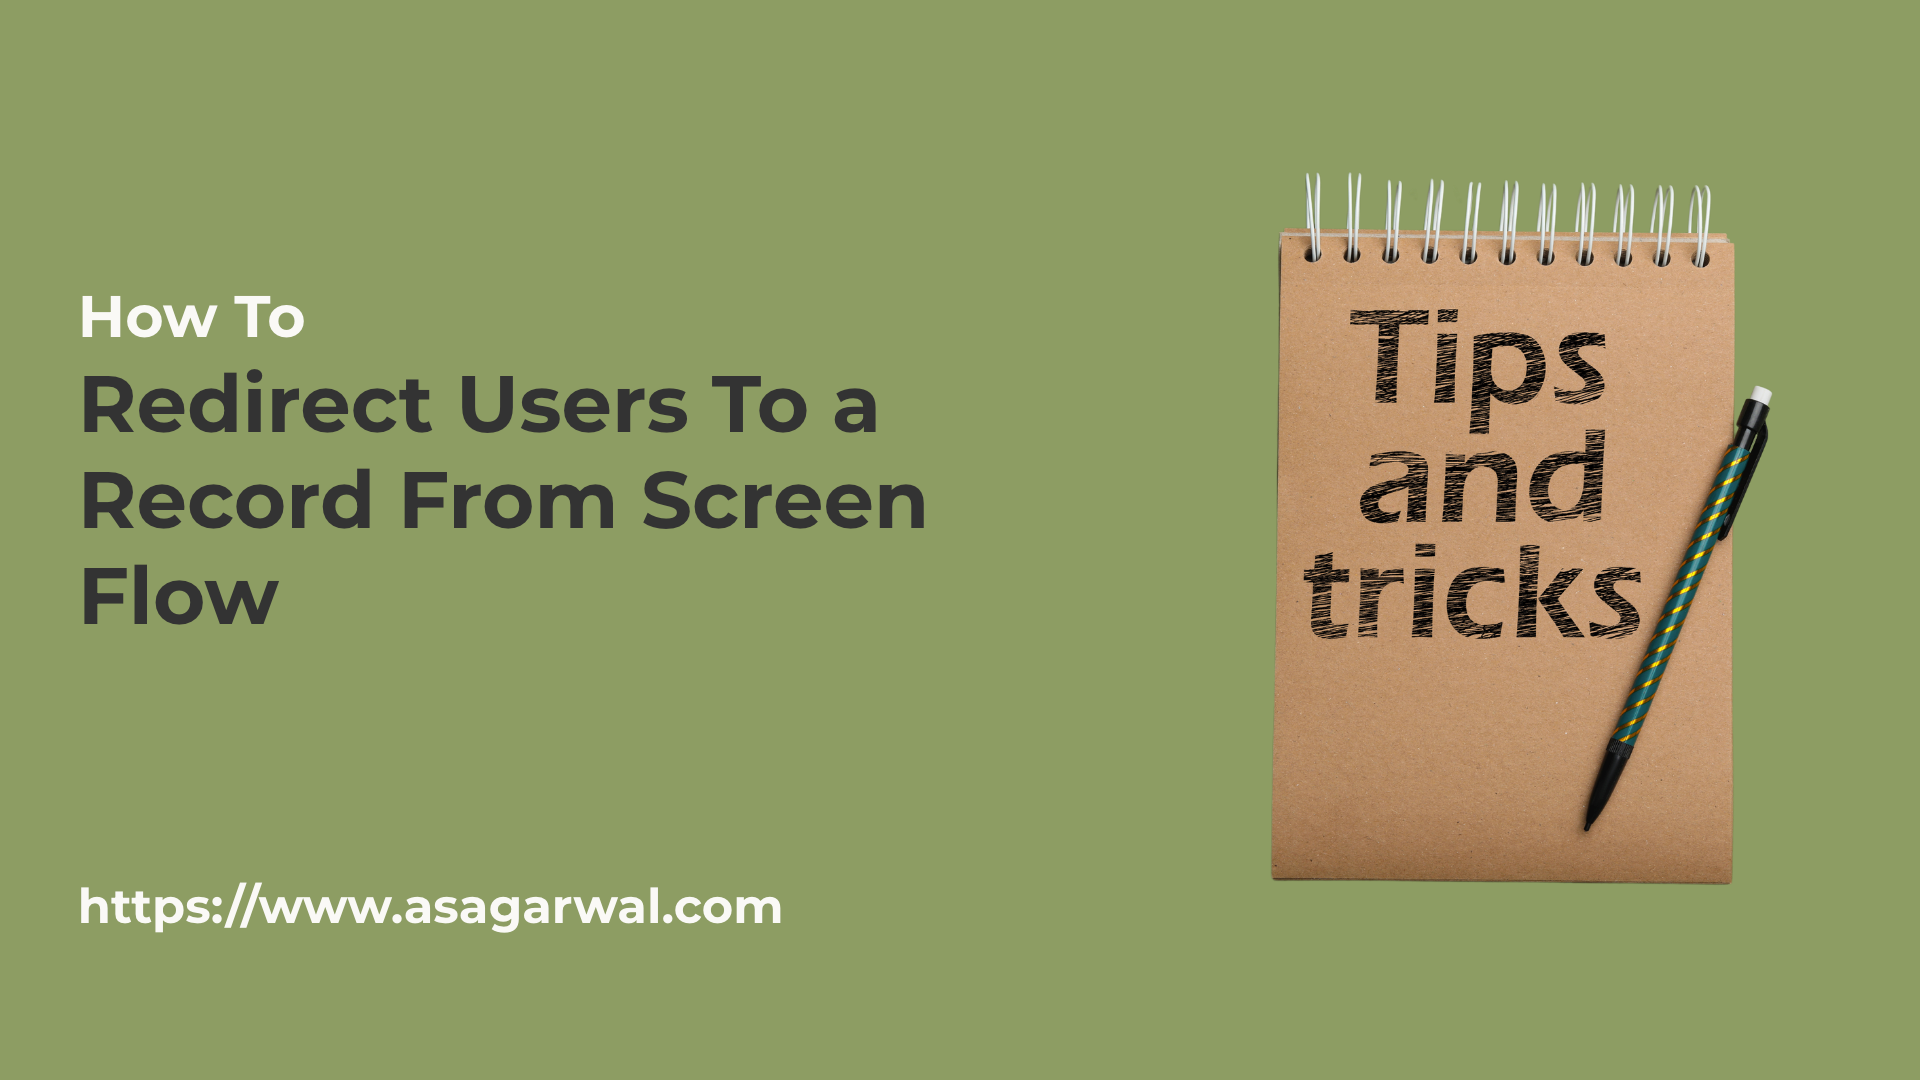 How To Redirect Users to a Record from Screen Flow